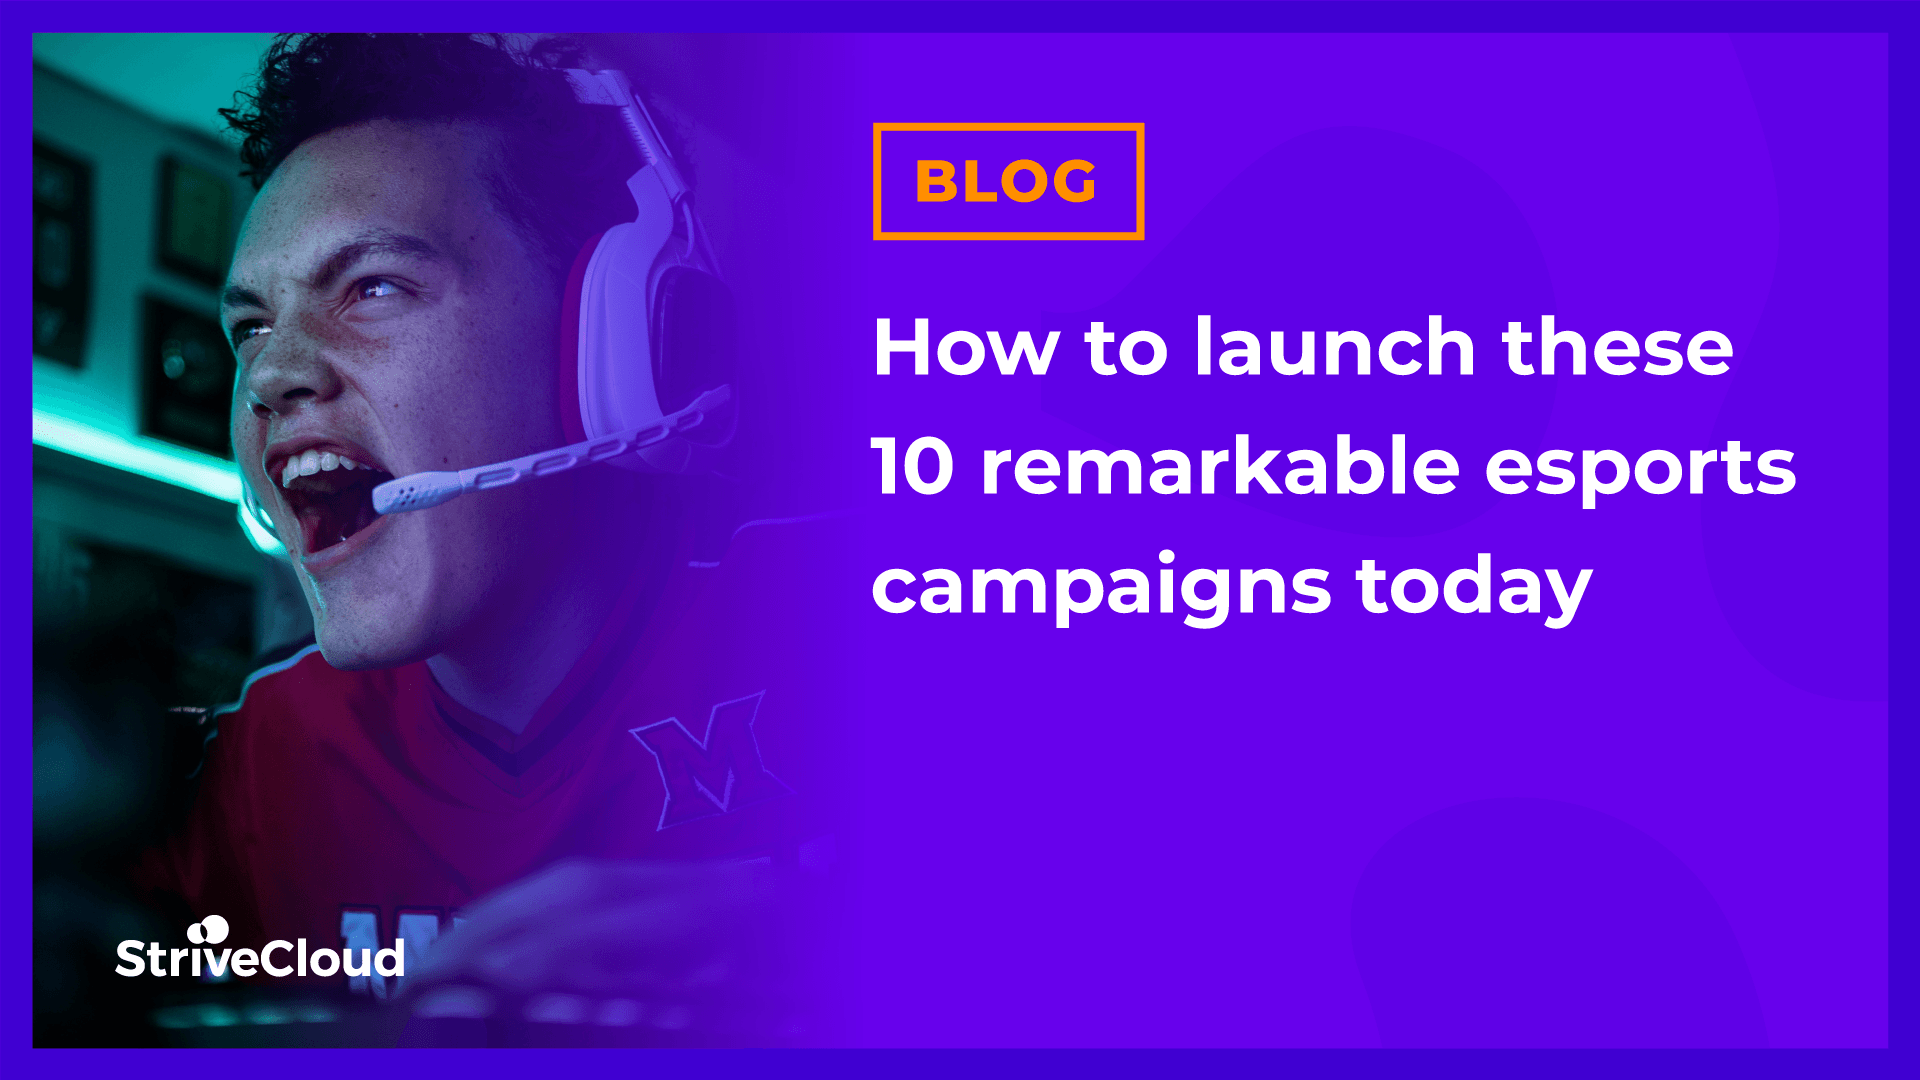 How to launch these 10 remarkable esports campaigns today